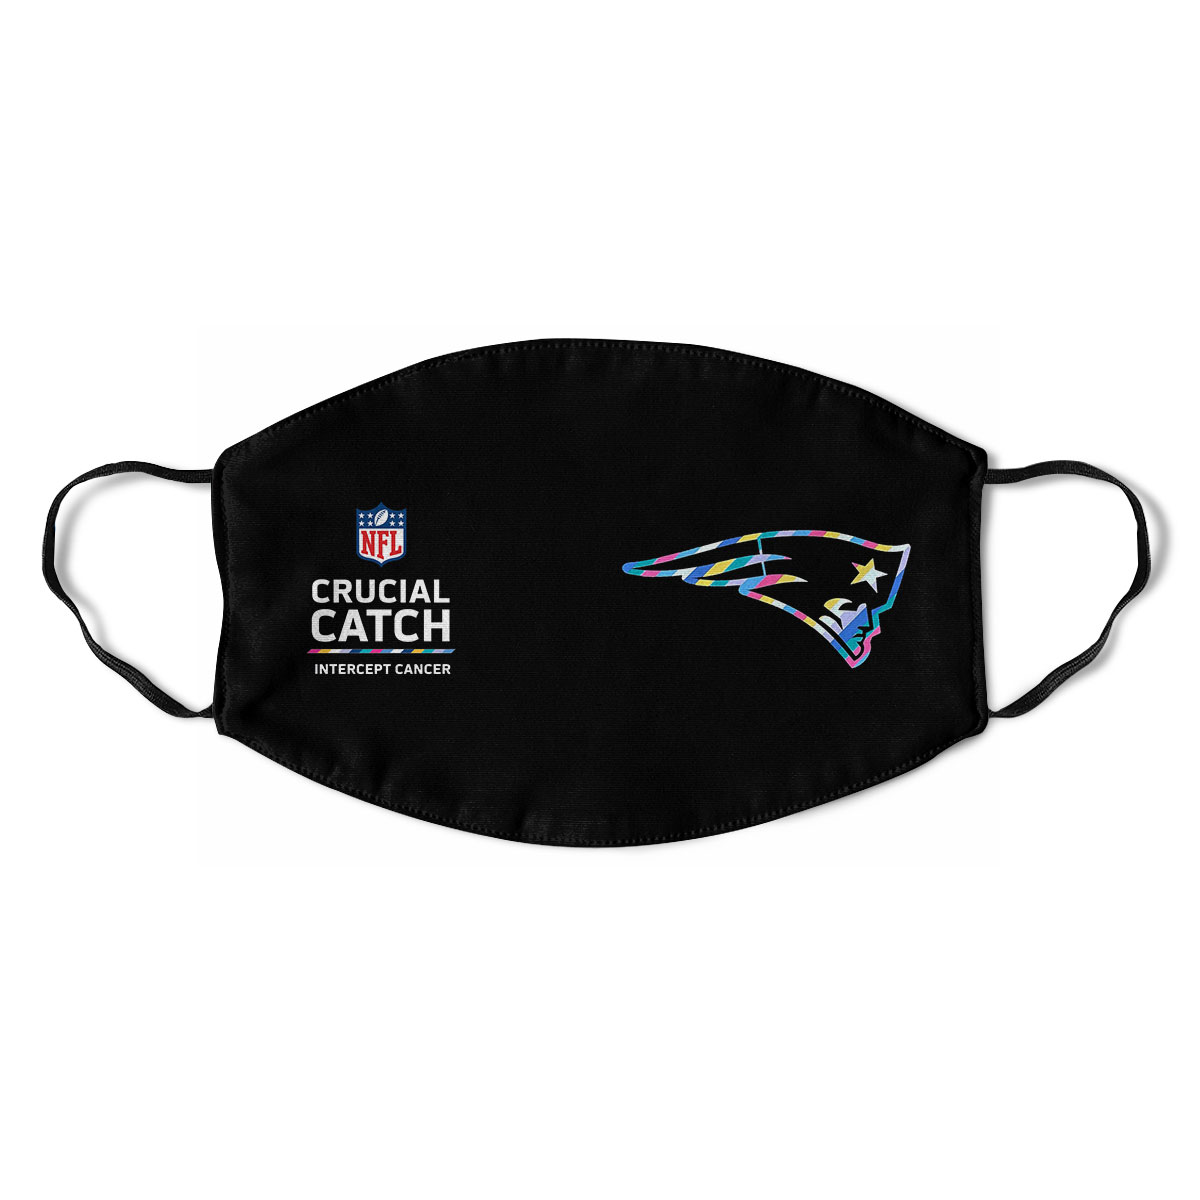 Miami Dolphins Nfl Crucial Catch Multicolor Face Mask Halloween